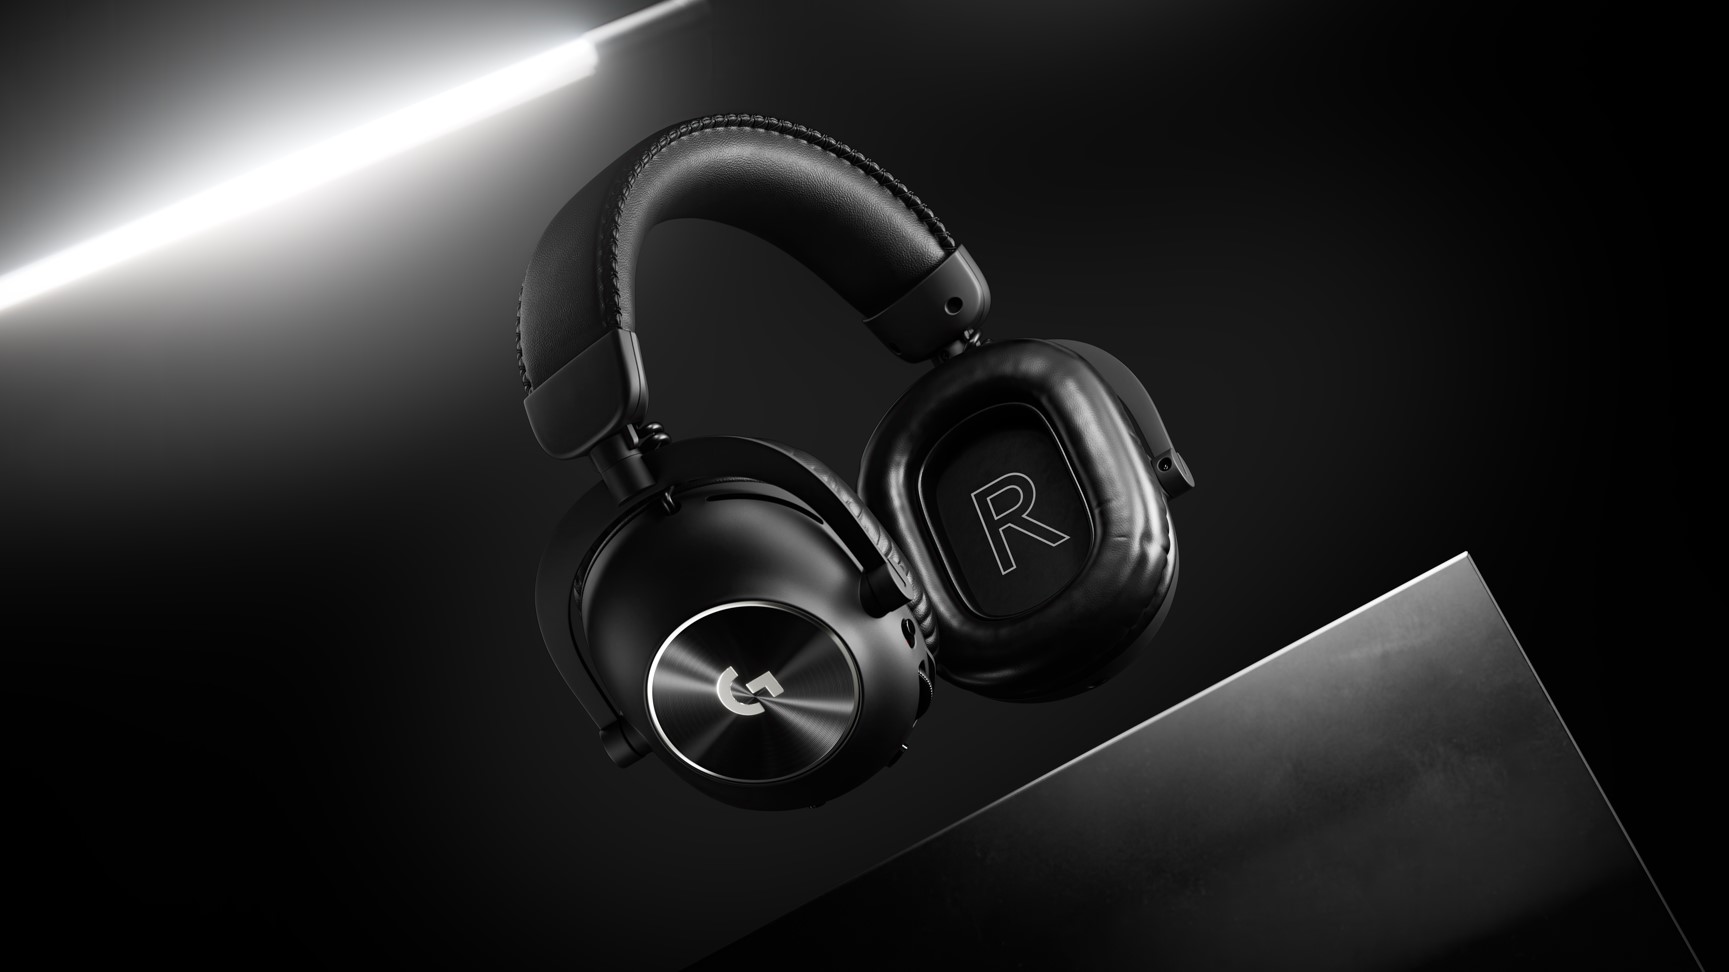 Logitech G Pro X2 Lightspeed wireless gaming headset is yours for RM1